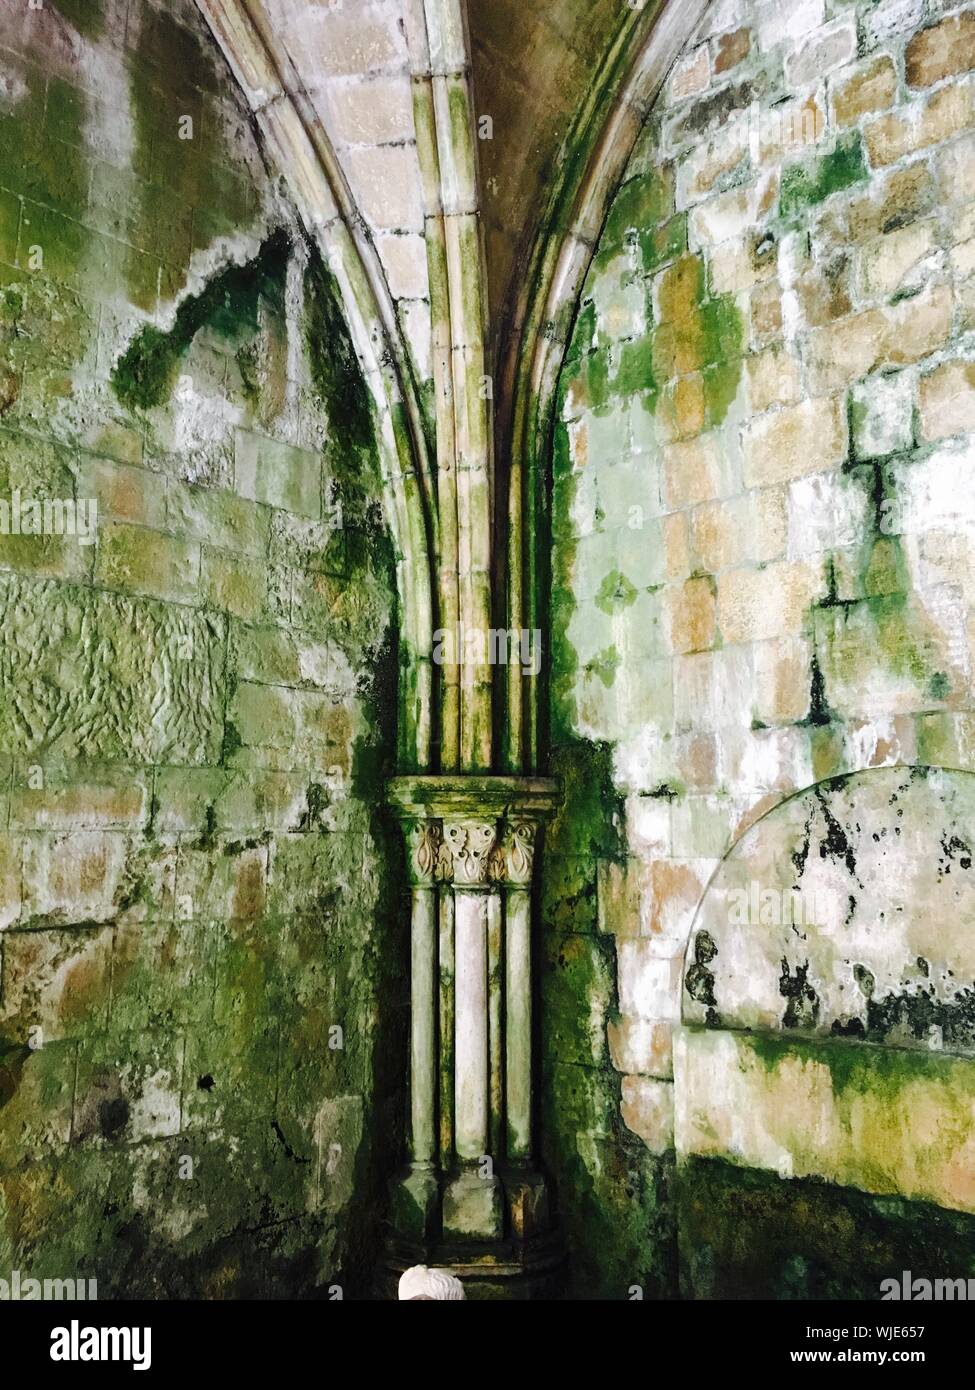 Moss On Gothic Column In Corner Amidst Stone Walls Stock Photo